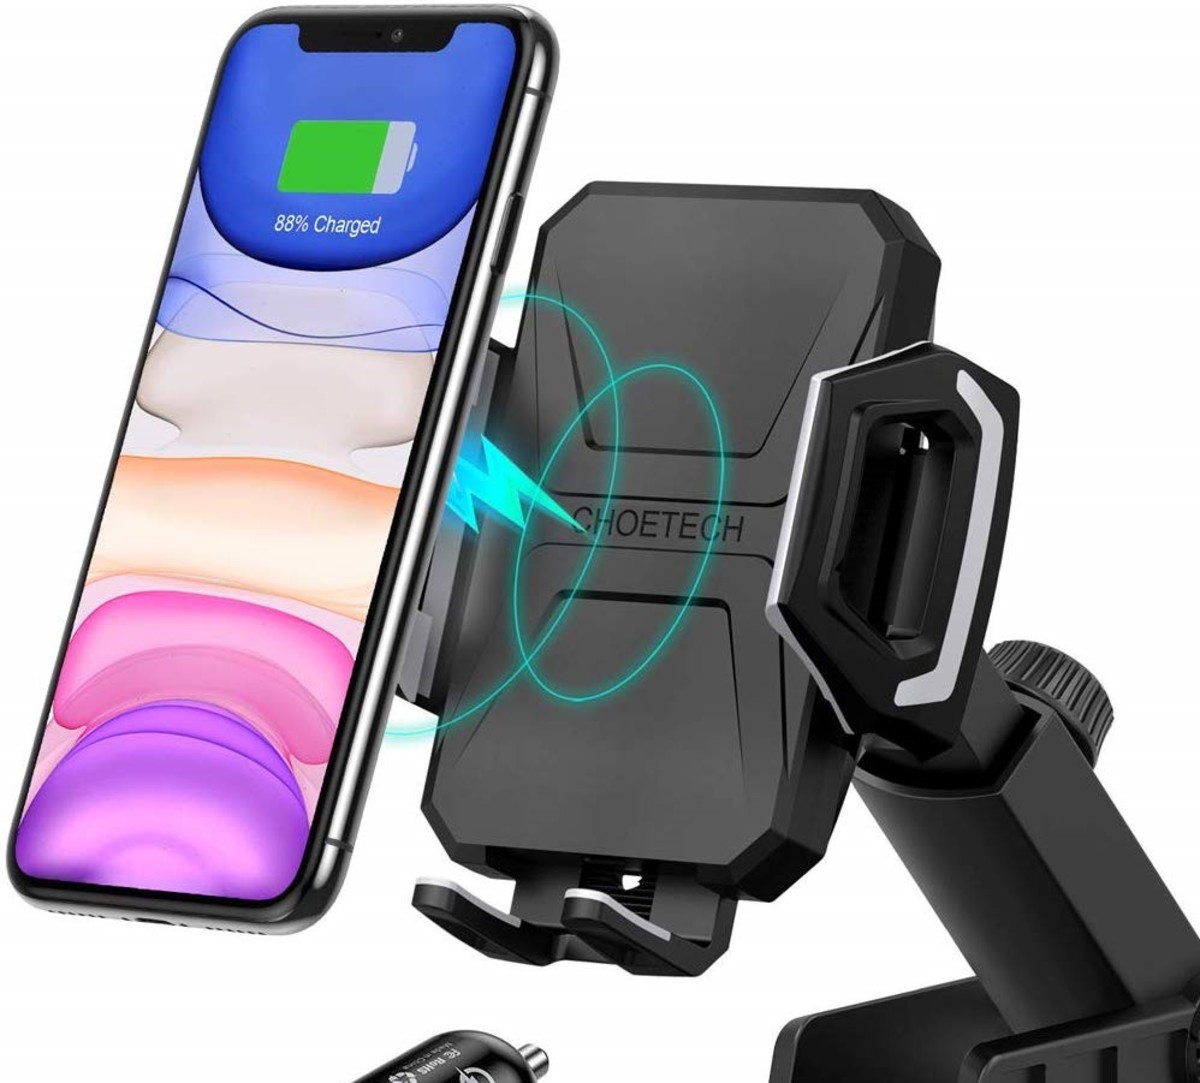 Review of Choetech Wireless Car Dock: Best iPhone 11 Car Charger